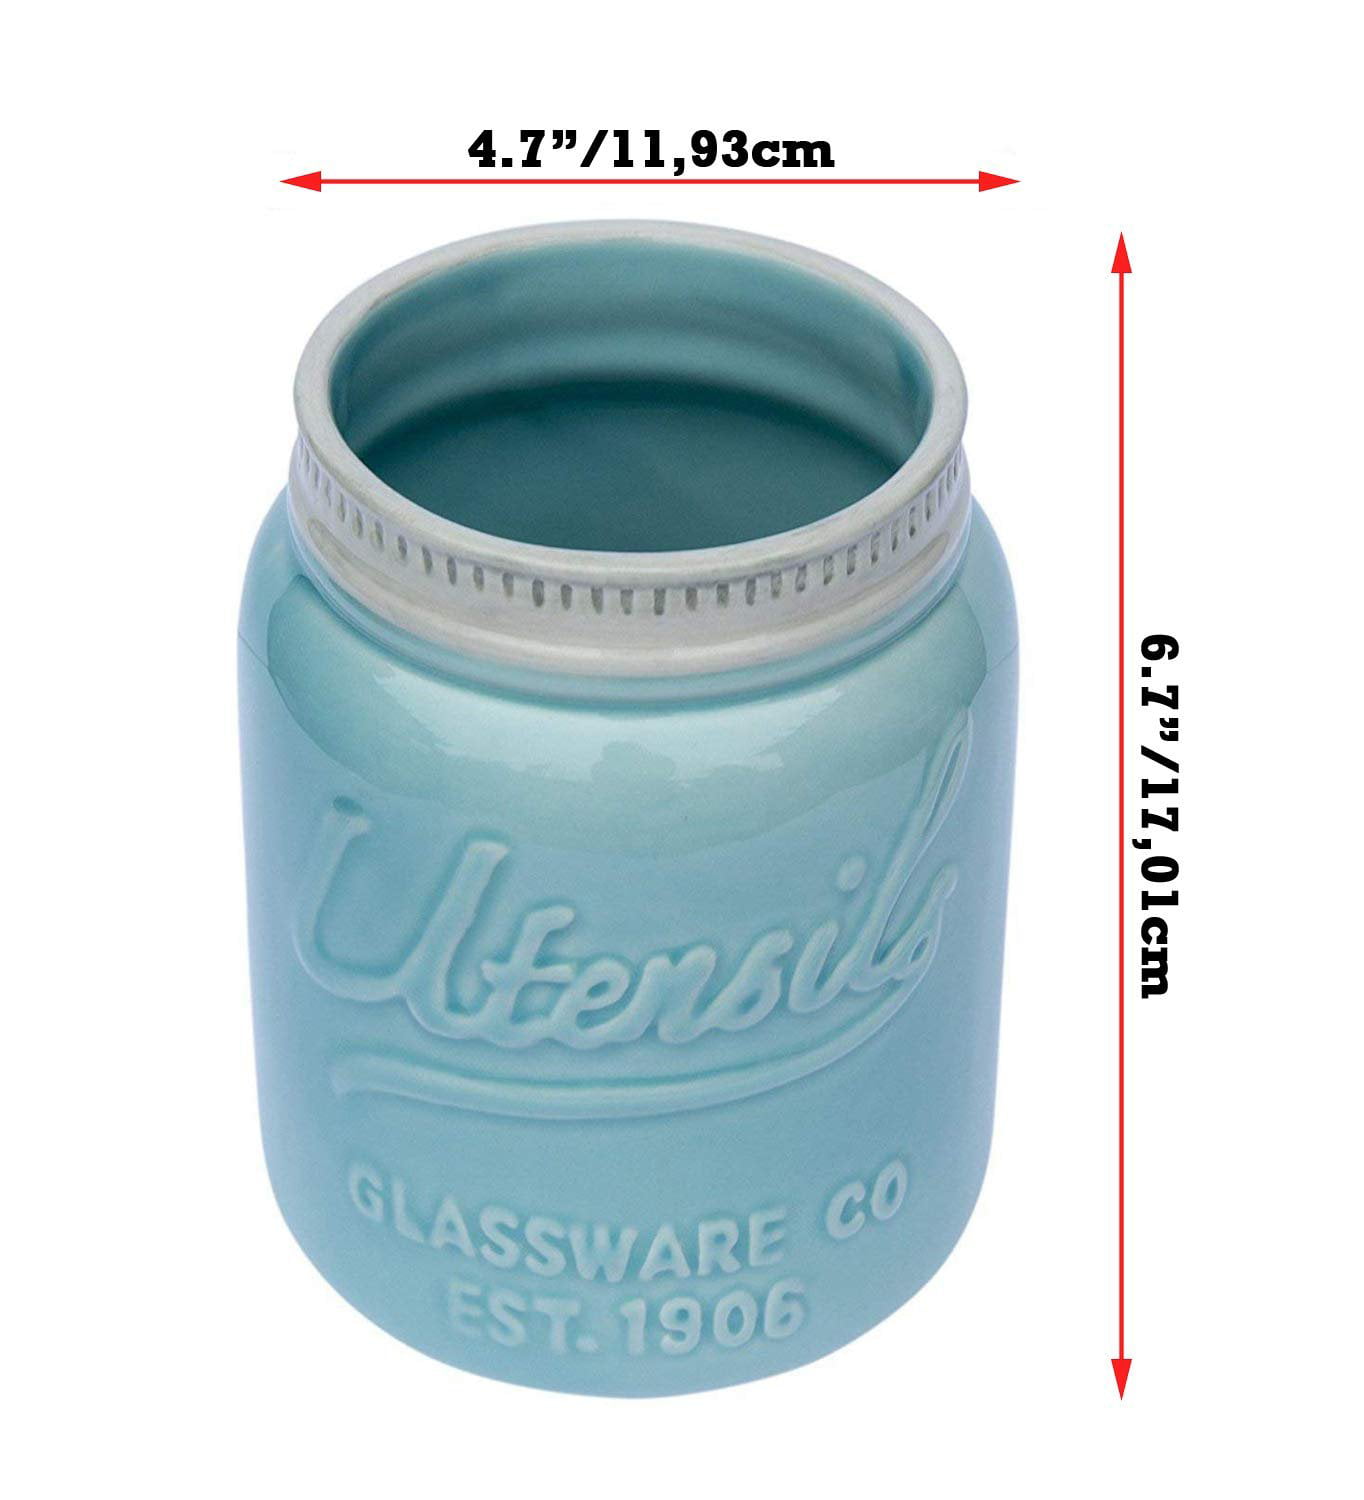 Dishwasher Safe Wide Mouth Mason Jar Utensil Holder by Comfify Kitchen Caddy Perfect Cookware Gift Decorative Kitchenware Organizer Crock Chip Resistant Ceramic Large Size 7 High w/ 4 Mouth Aqua Blue